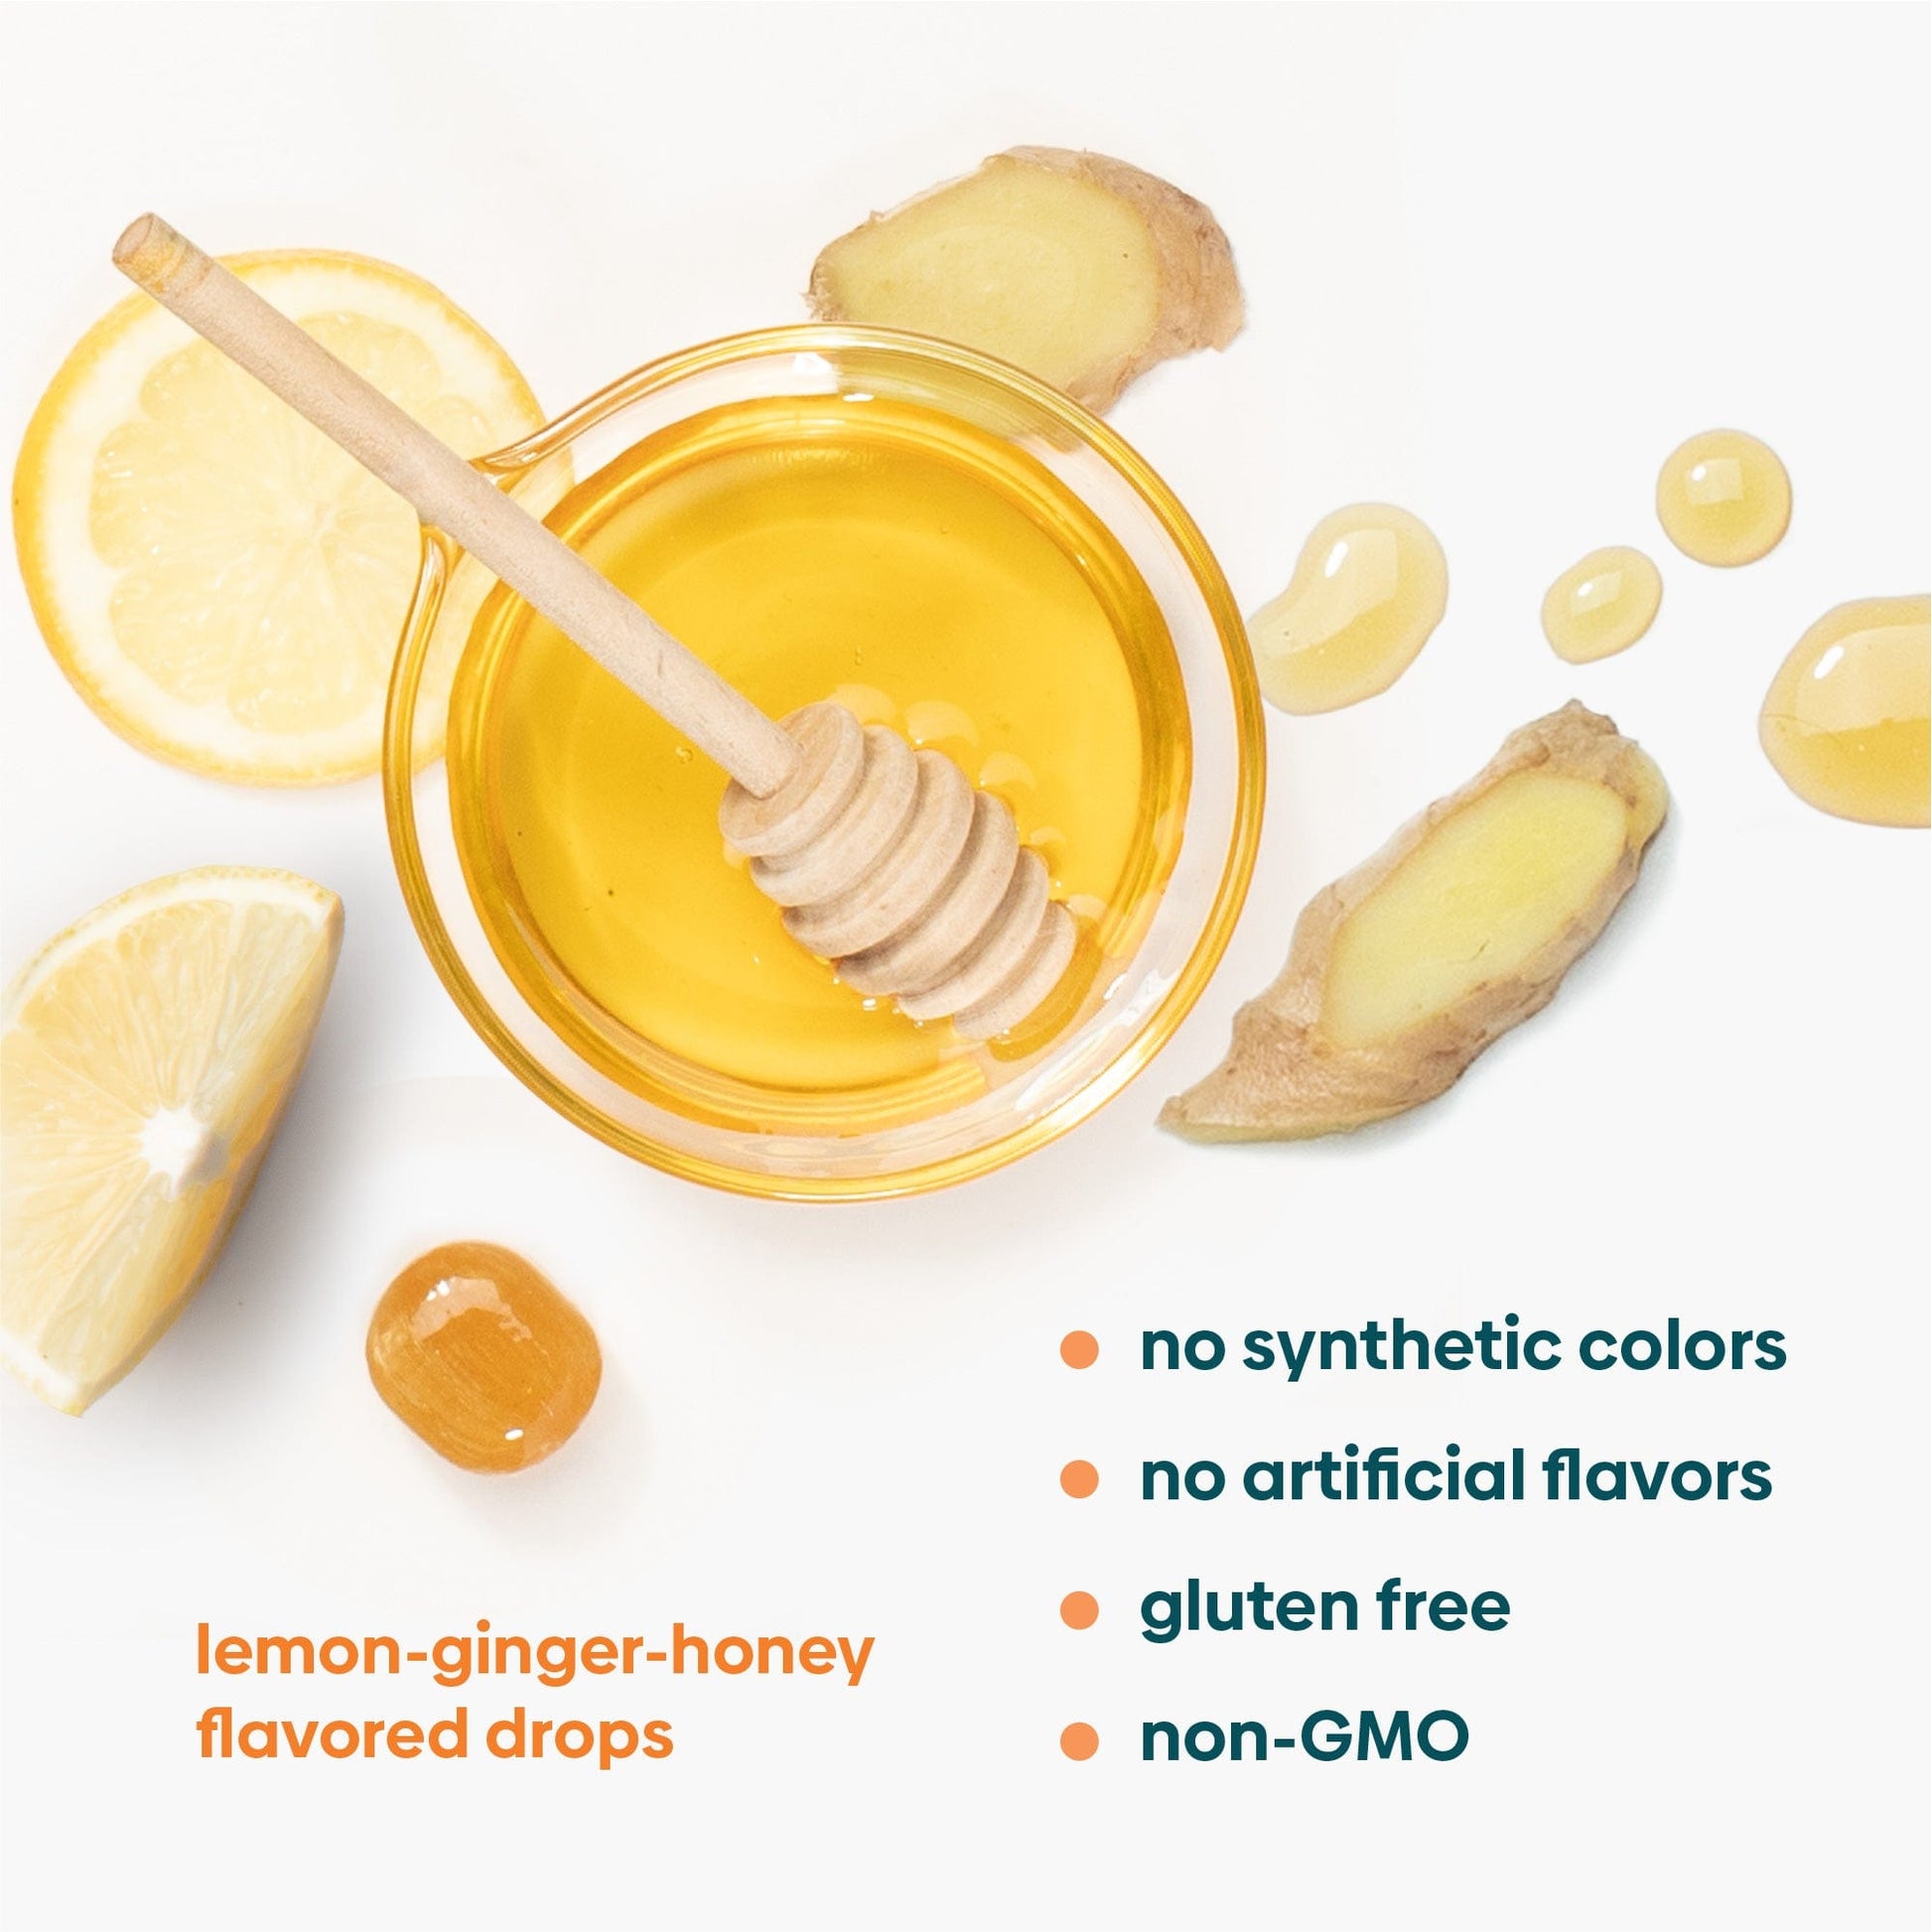 Lemon slices, pieces of ginger, and honey are ingredients in Stomach Settle drops